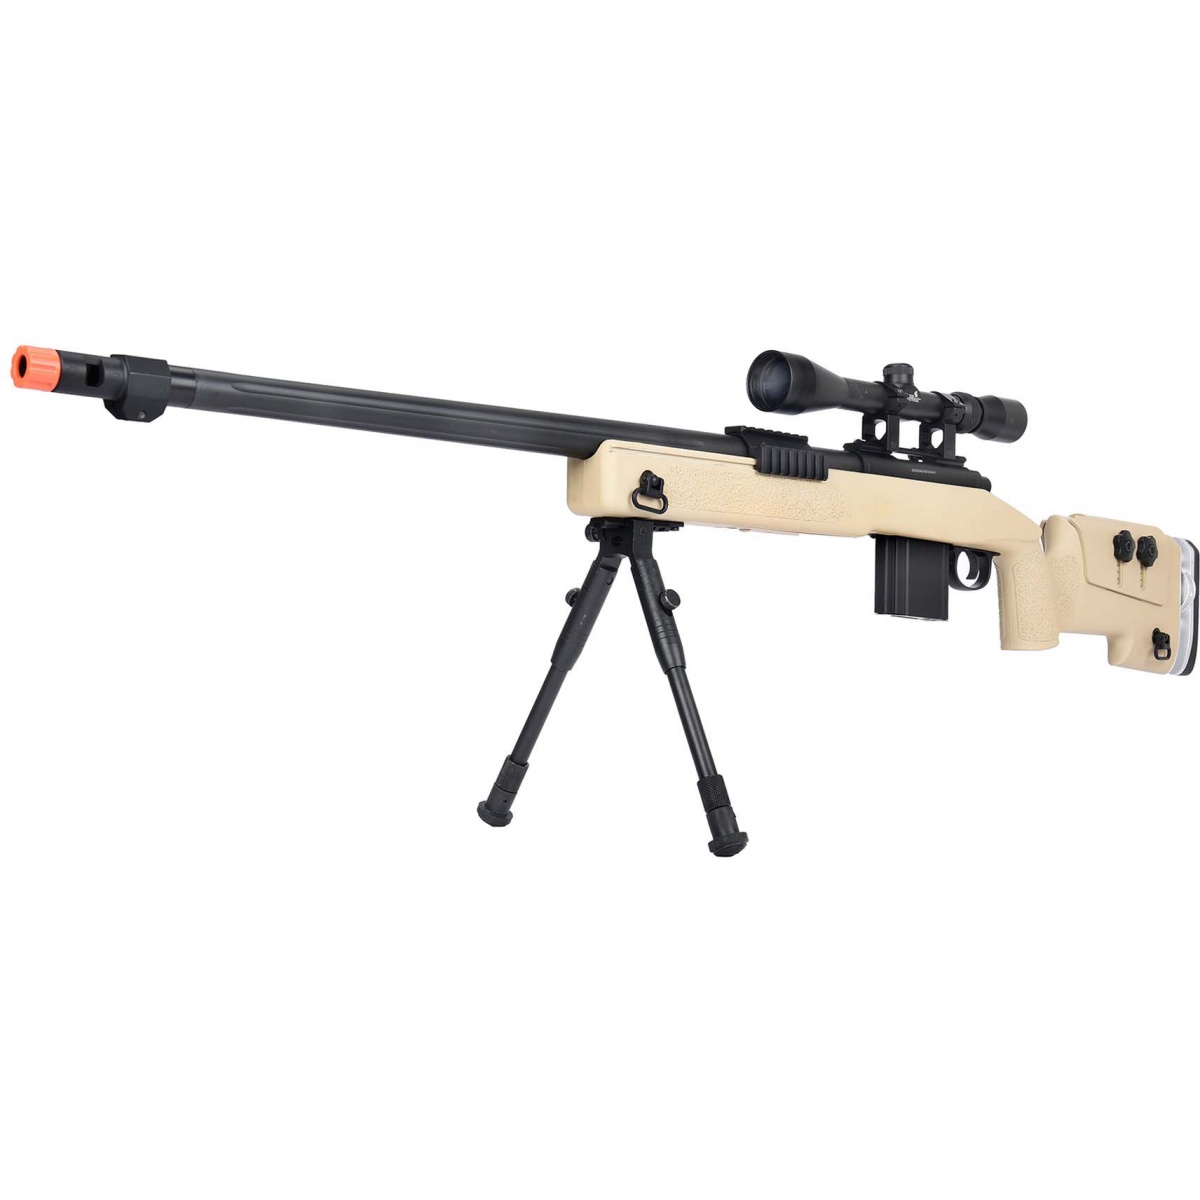 WellFire MB4417 M40A3 Bolt Action Airsoft Sniper Rifle w/ Scope & Bipod ...